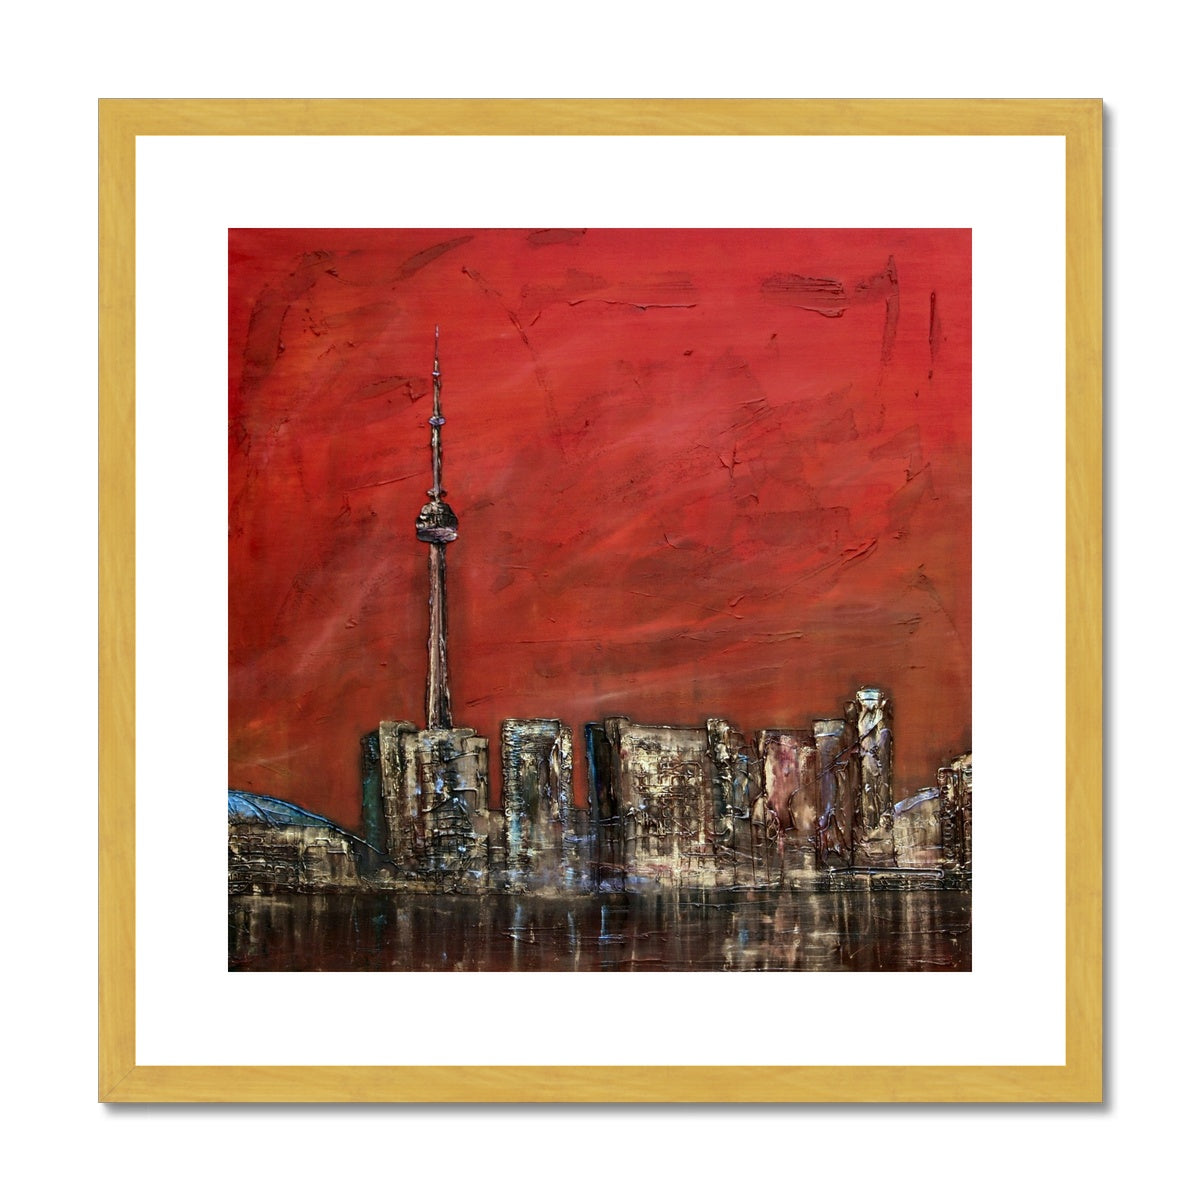 Toronto Sunset Painting | Antique Framed & Mounted Prints From Scotland-Antique Framed & Mounted Prints-World Art Gallery-20"x20"-Gold Frame-Paintings, Prints, Homeware, Art Gifts From Scotland By Scottish Artist Kevin Hunter